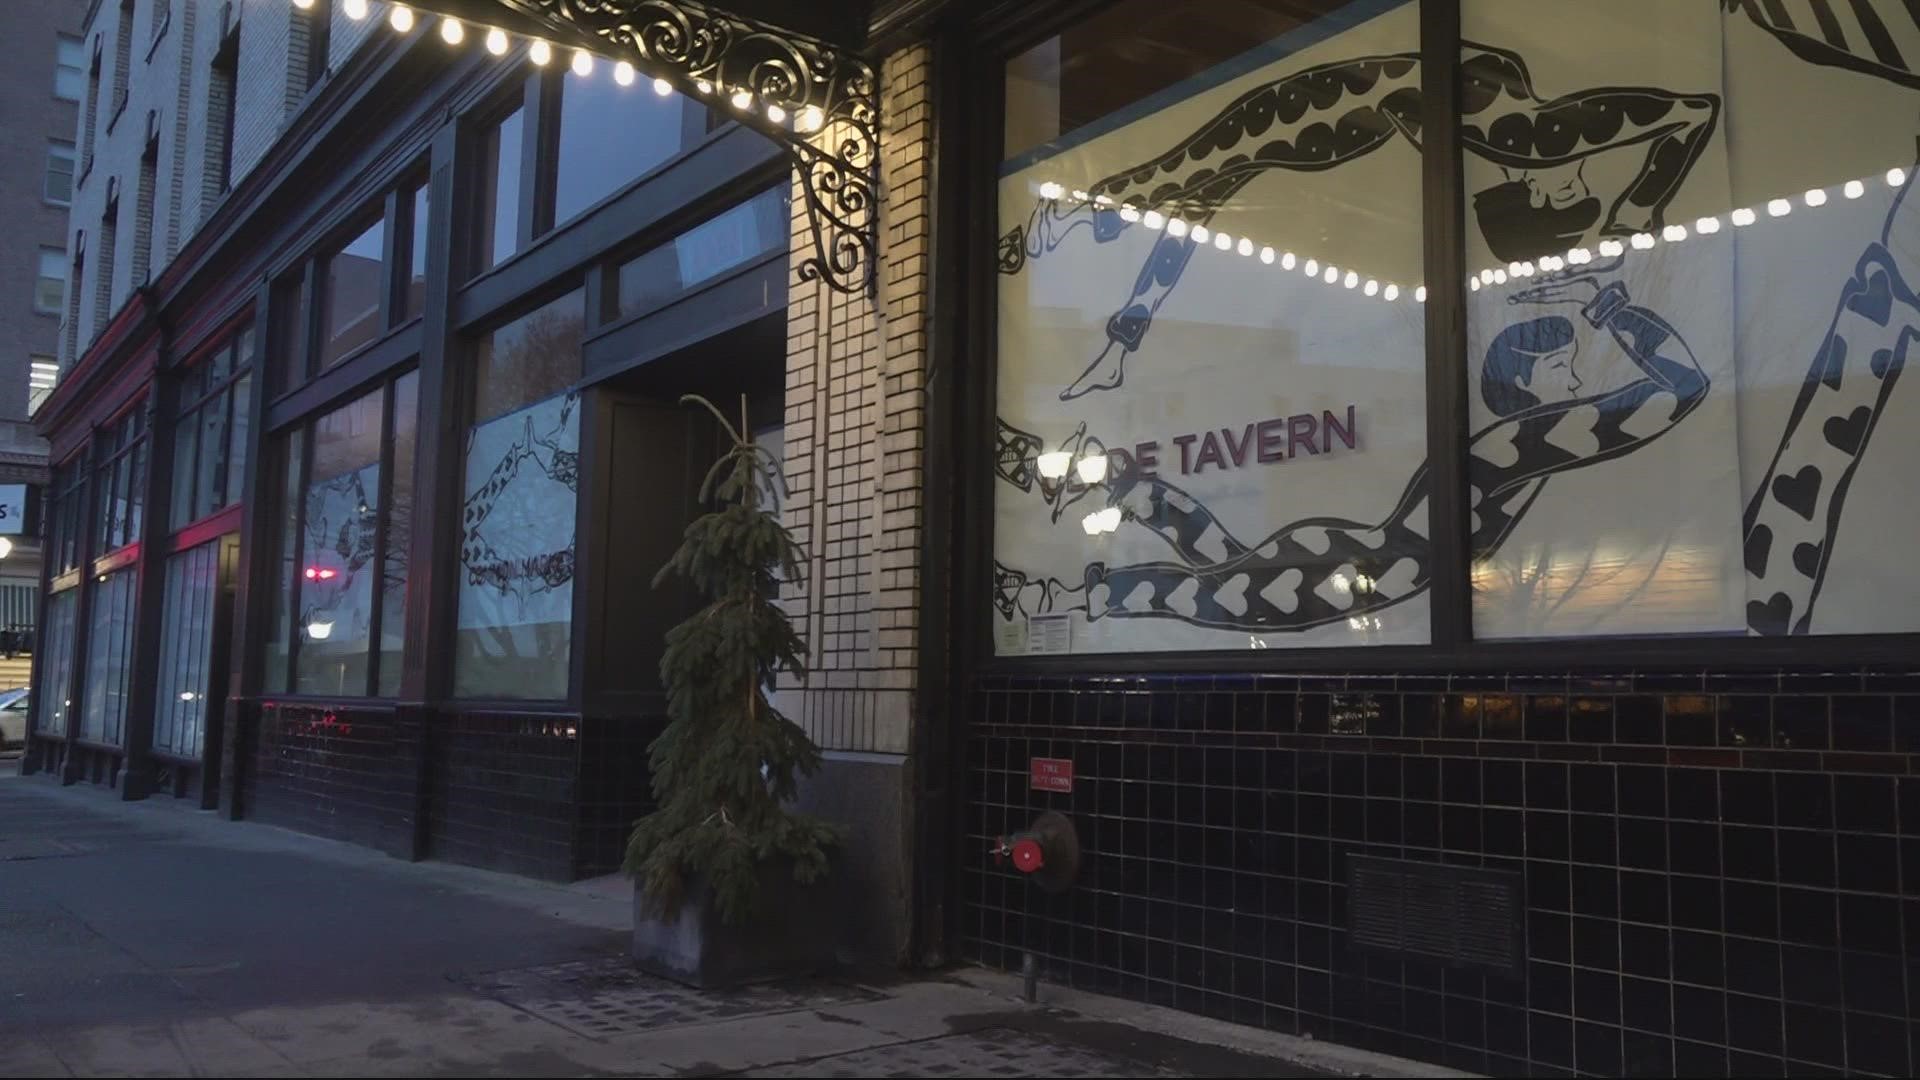 Nearly two years into the COVID-19 pandemic, restaurant owners in Portland are still feeling the struggle. KGW's Alma McCarty reports.